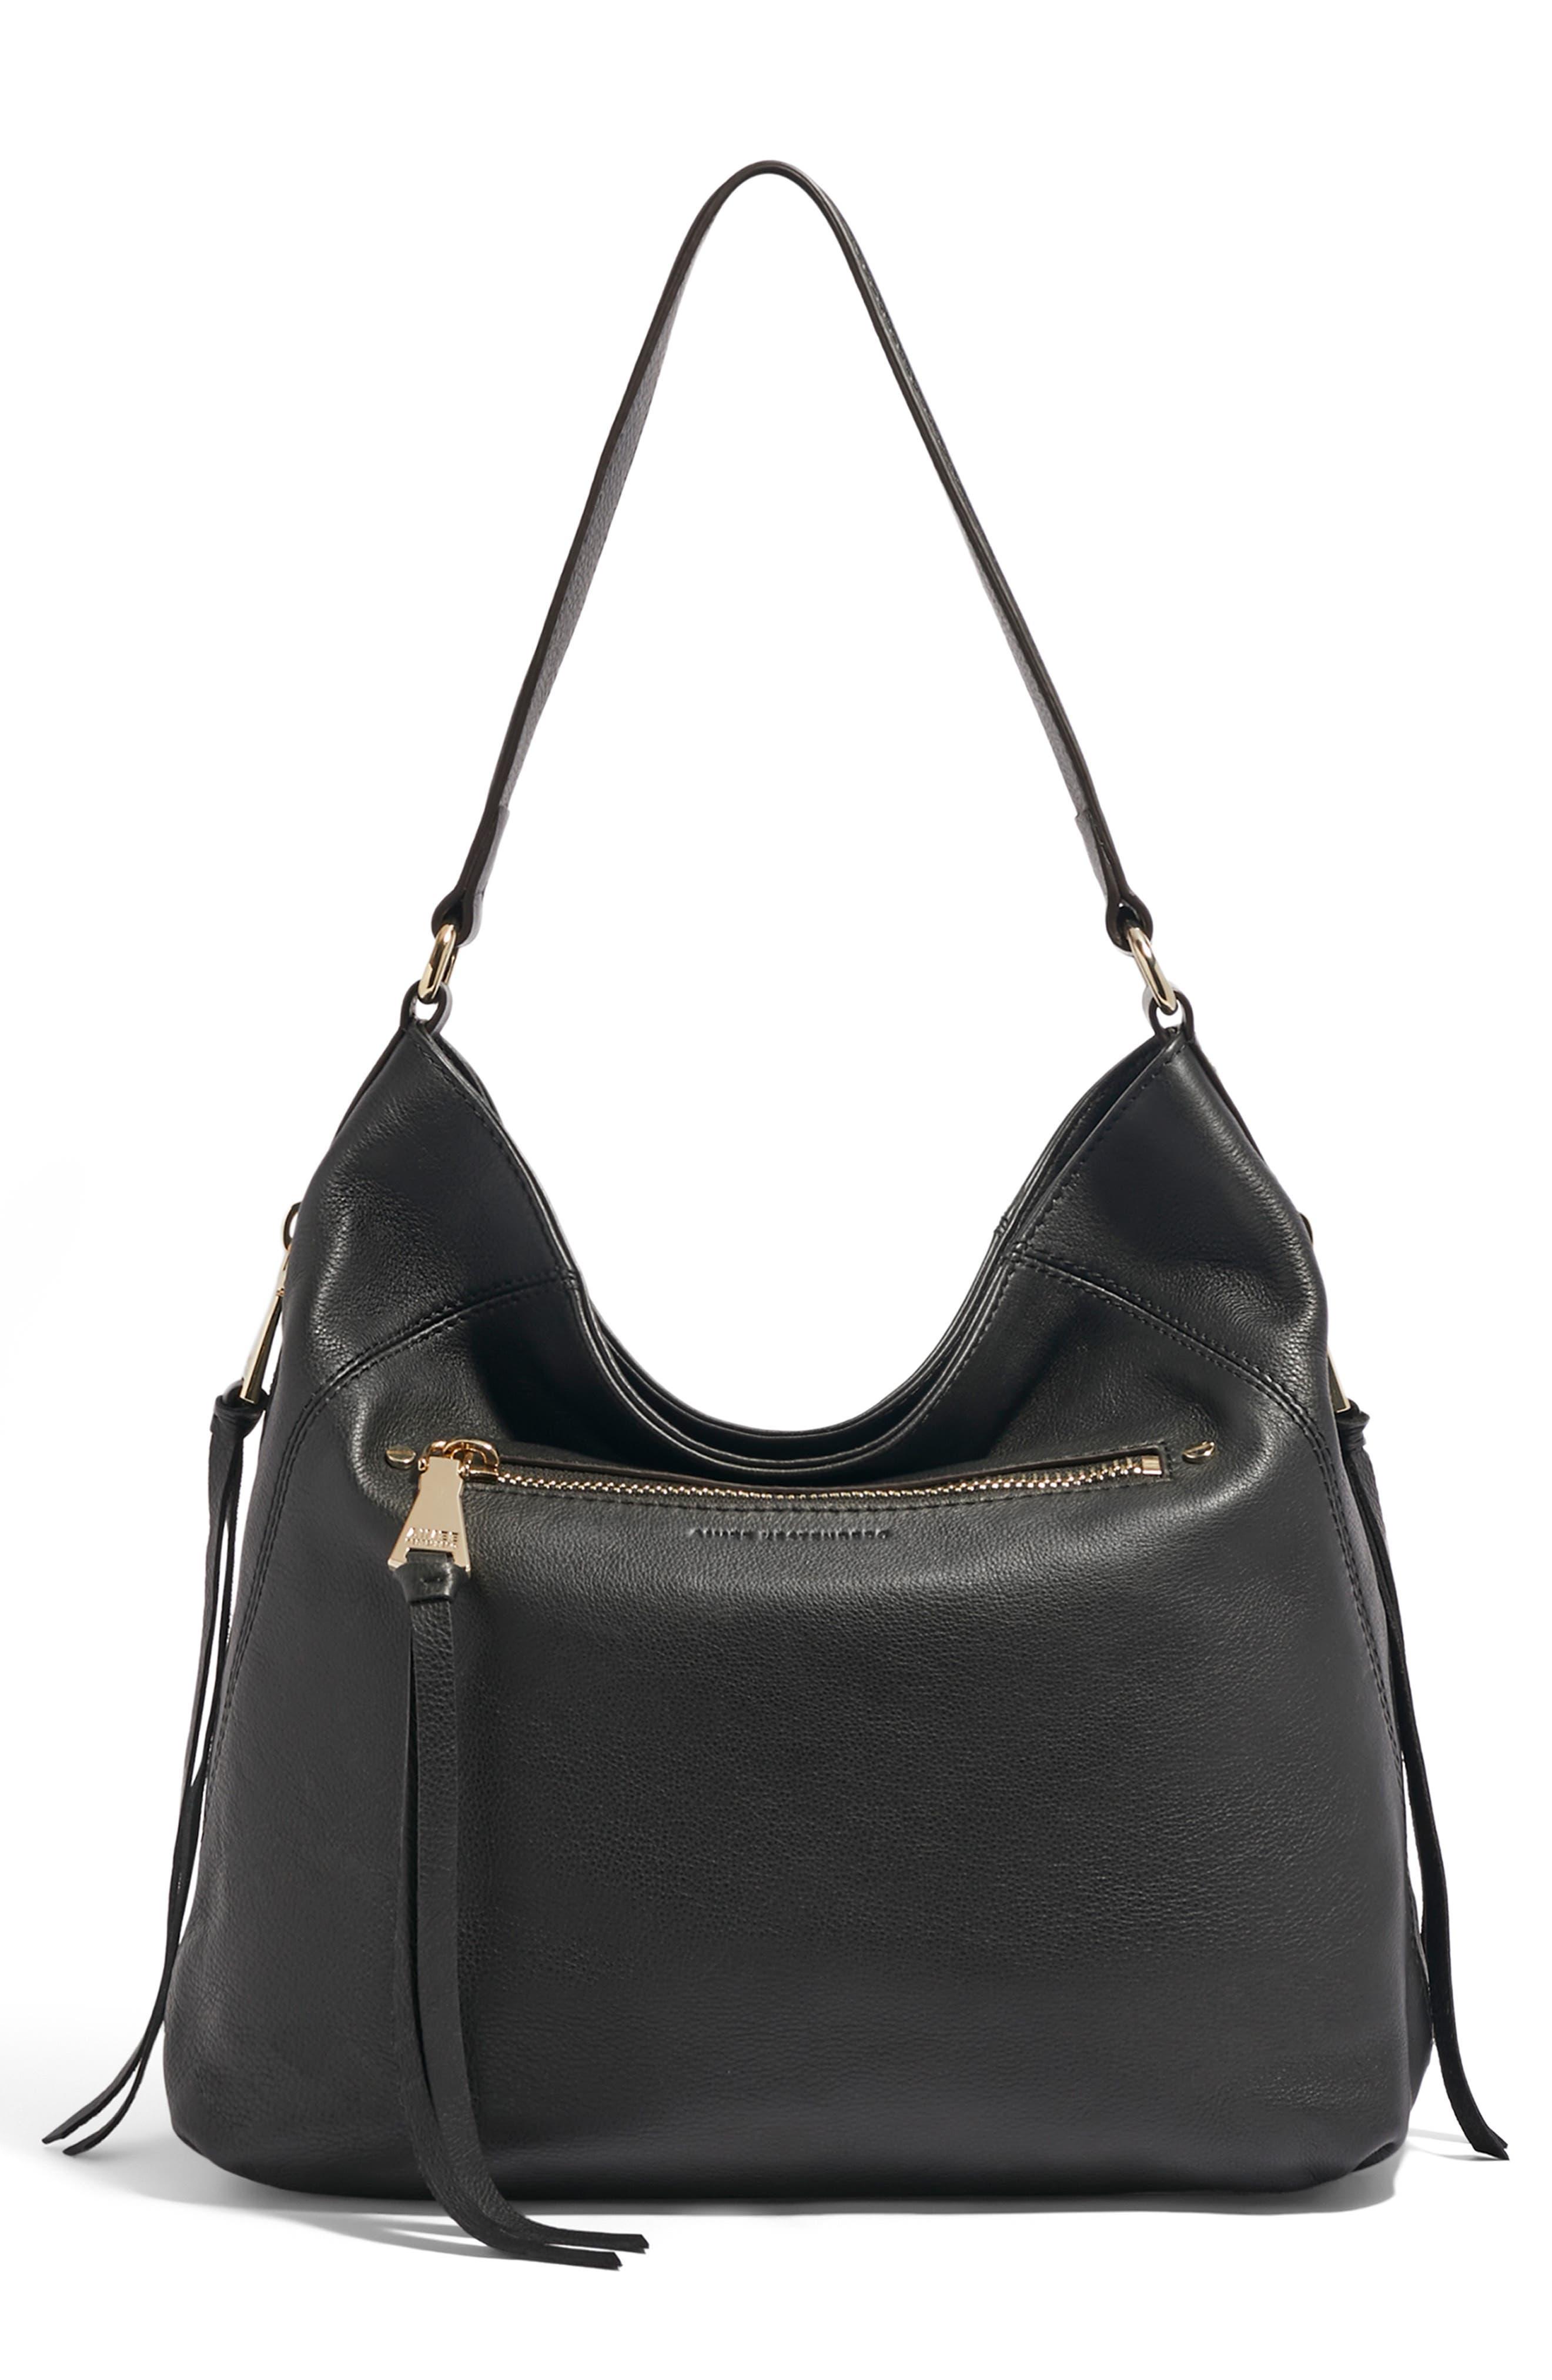 Aimee Kestenberg Night Is Young Leather Hobo Bag in Black | Lyst